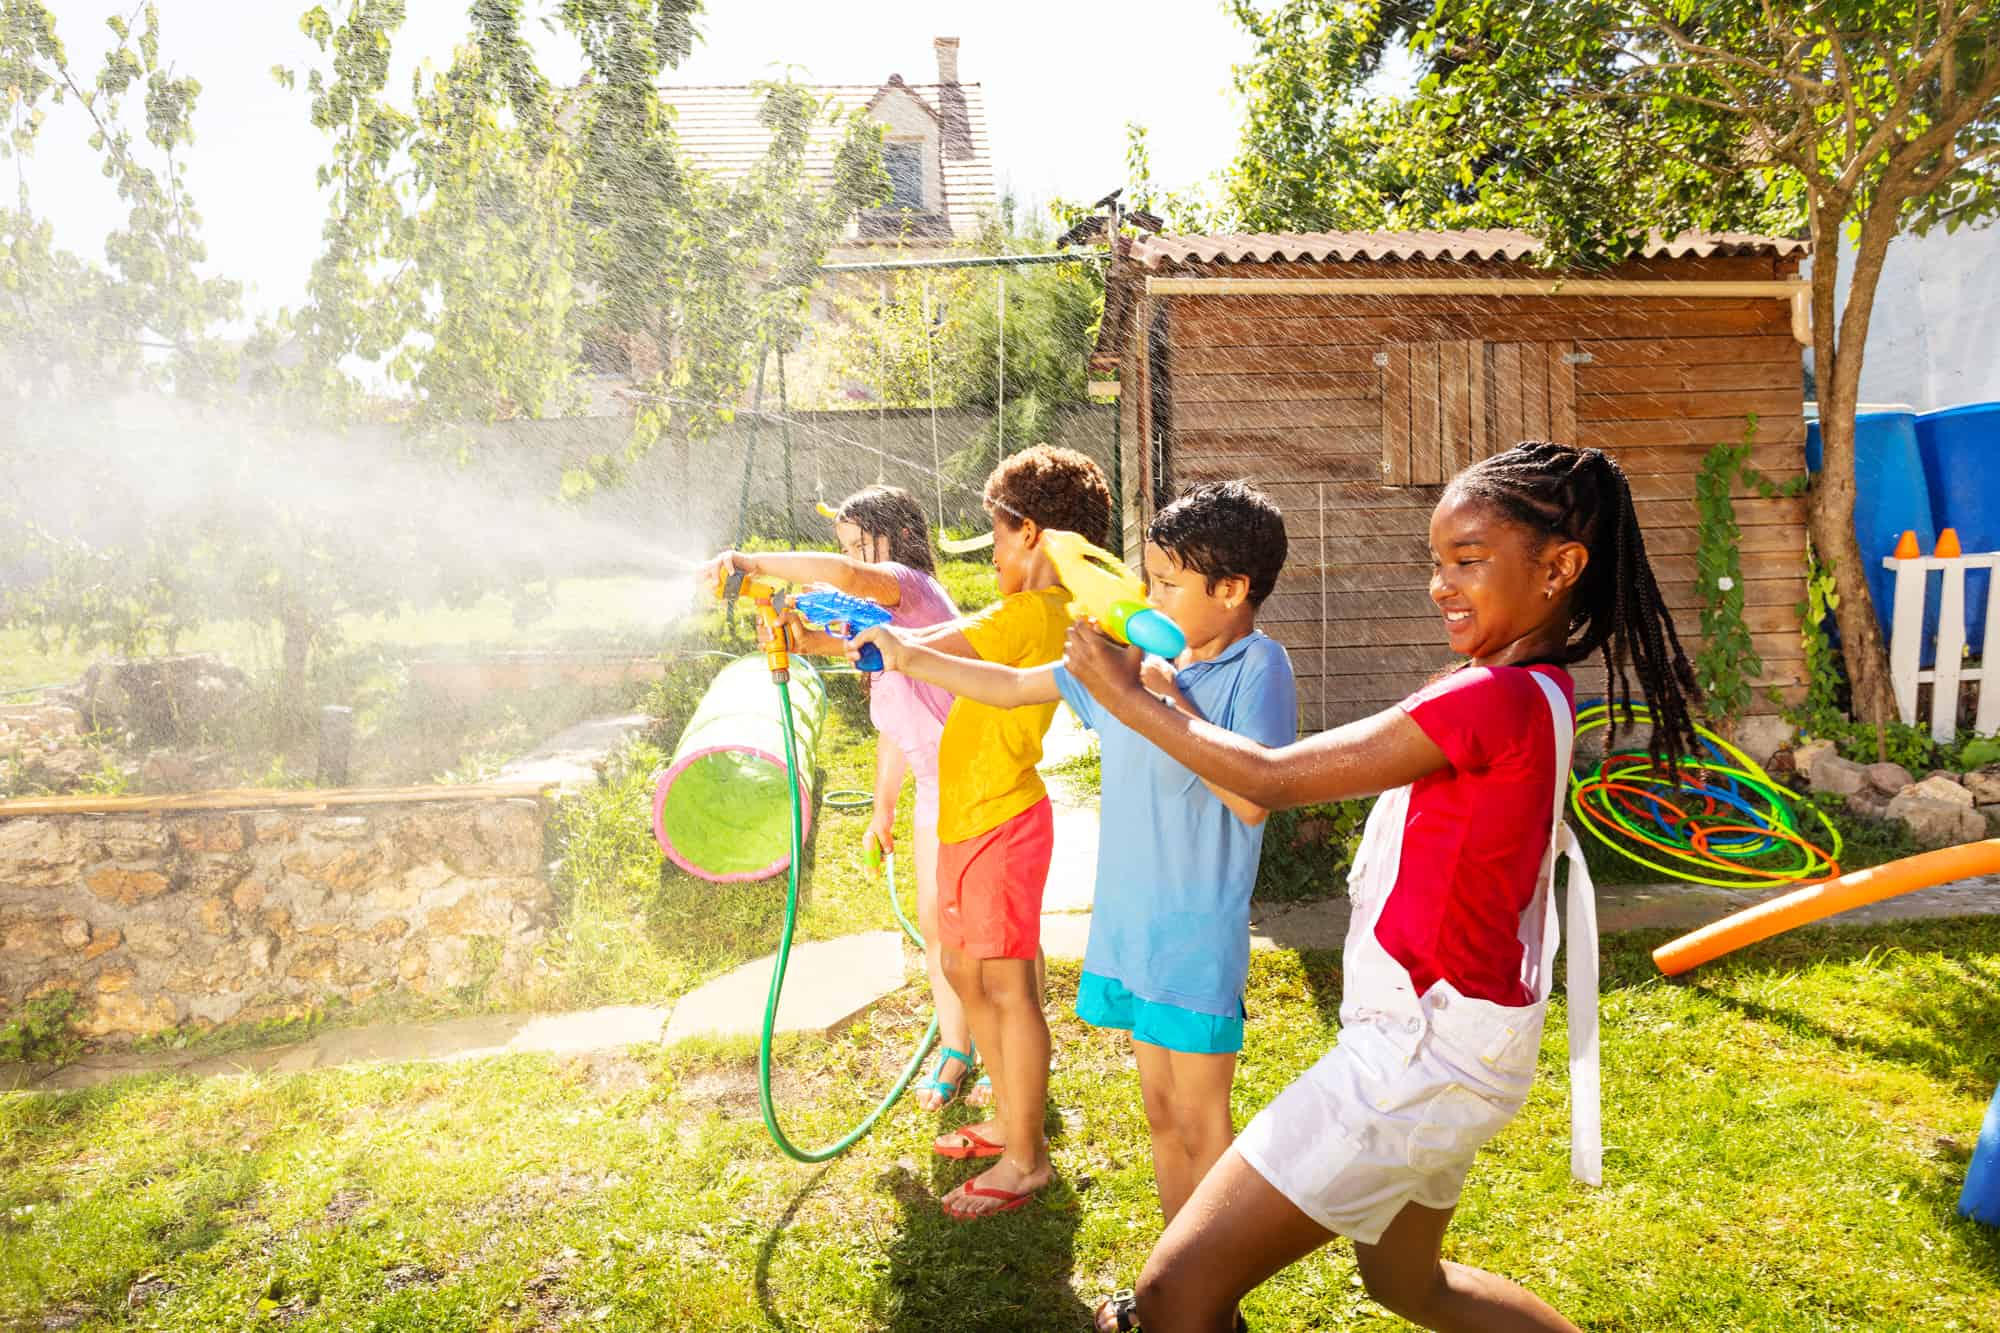 four kids in line having fun with water guns playing backyard activities for kids, outdoors